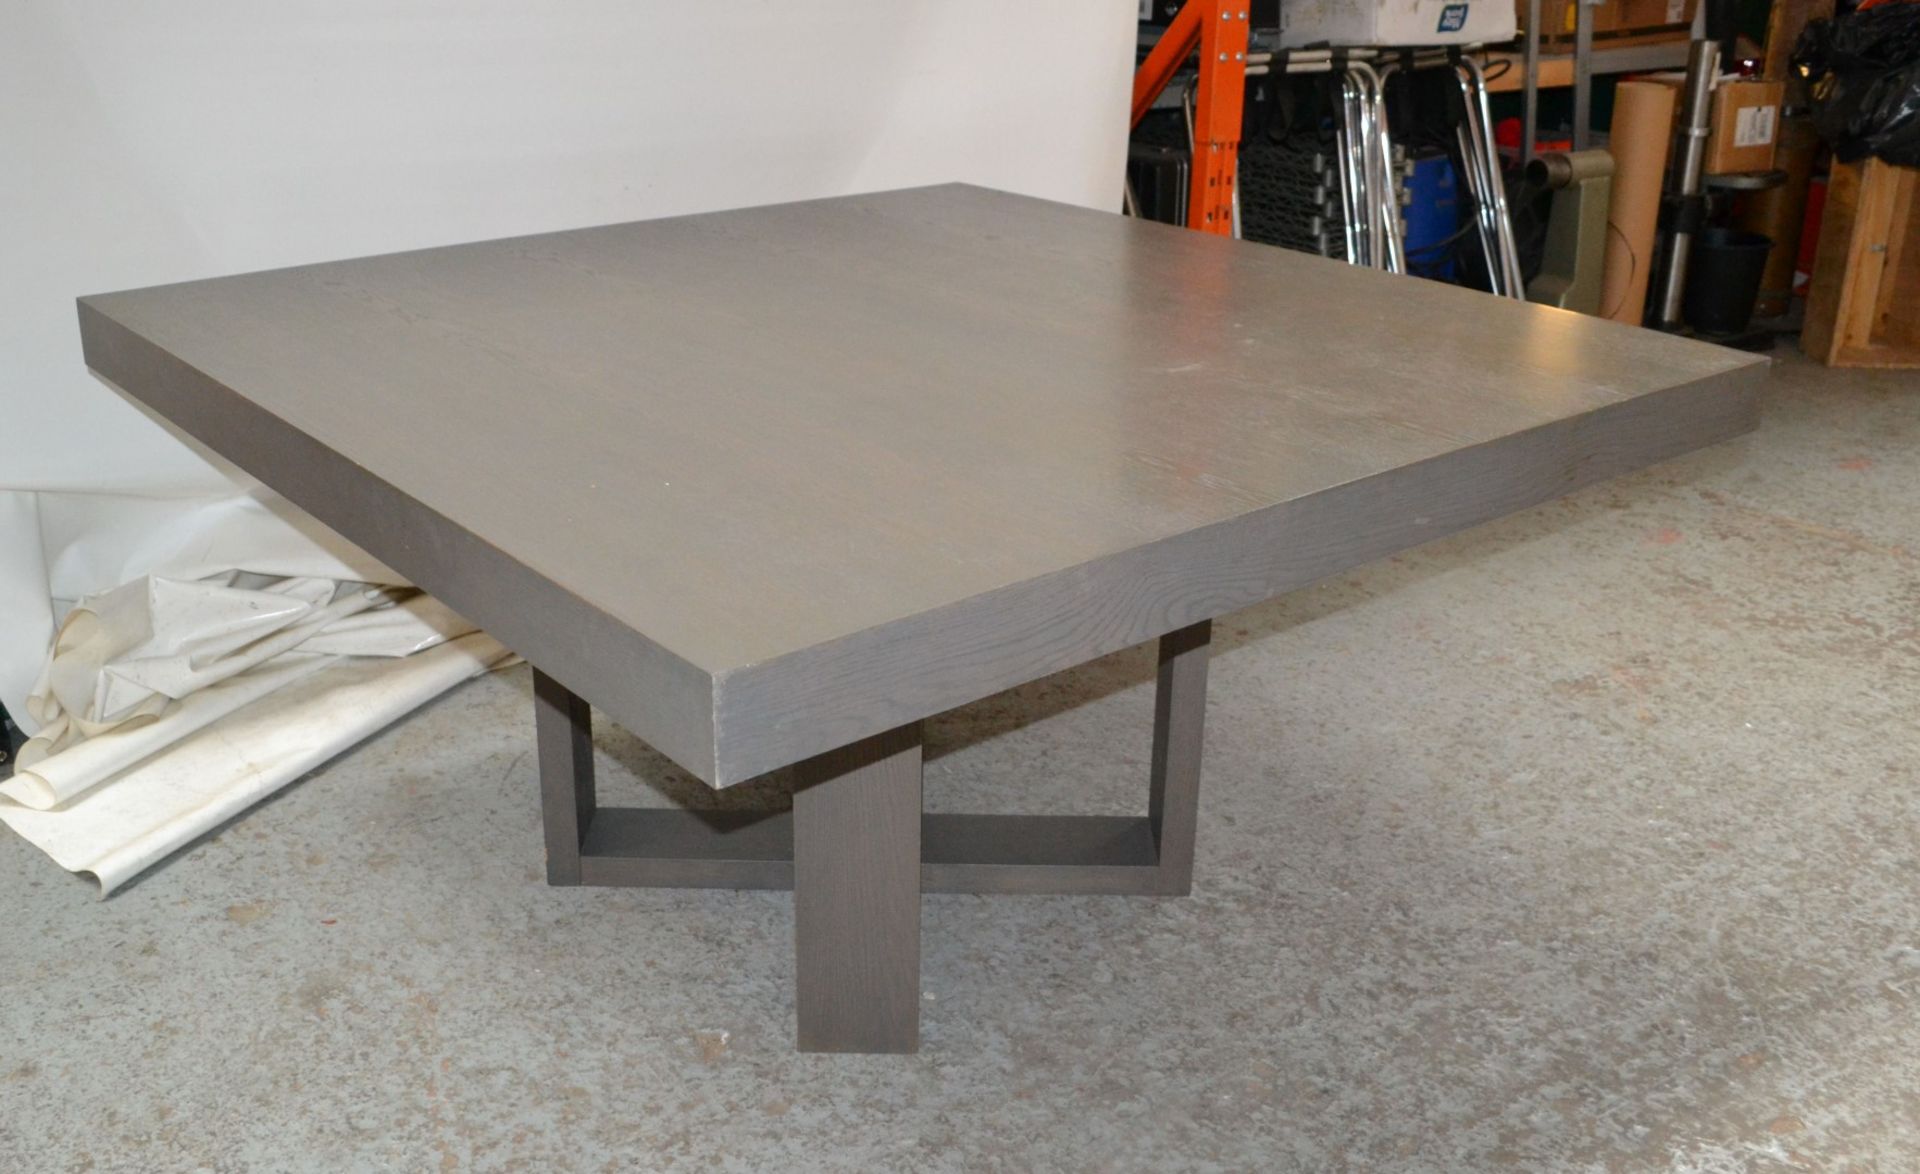 1 x Large Square Wooden Dining Table in a Grey Oak Coloured Finish - CL314 - Location: Altrincham